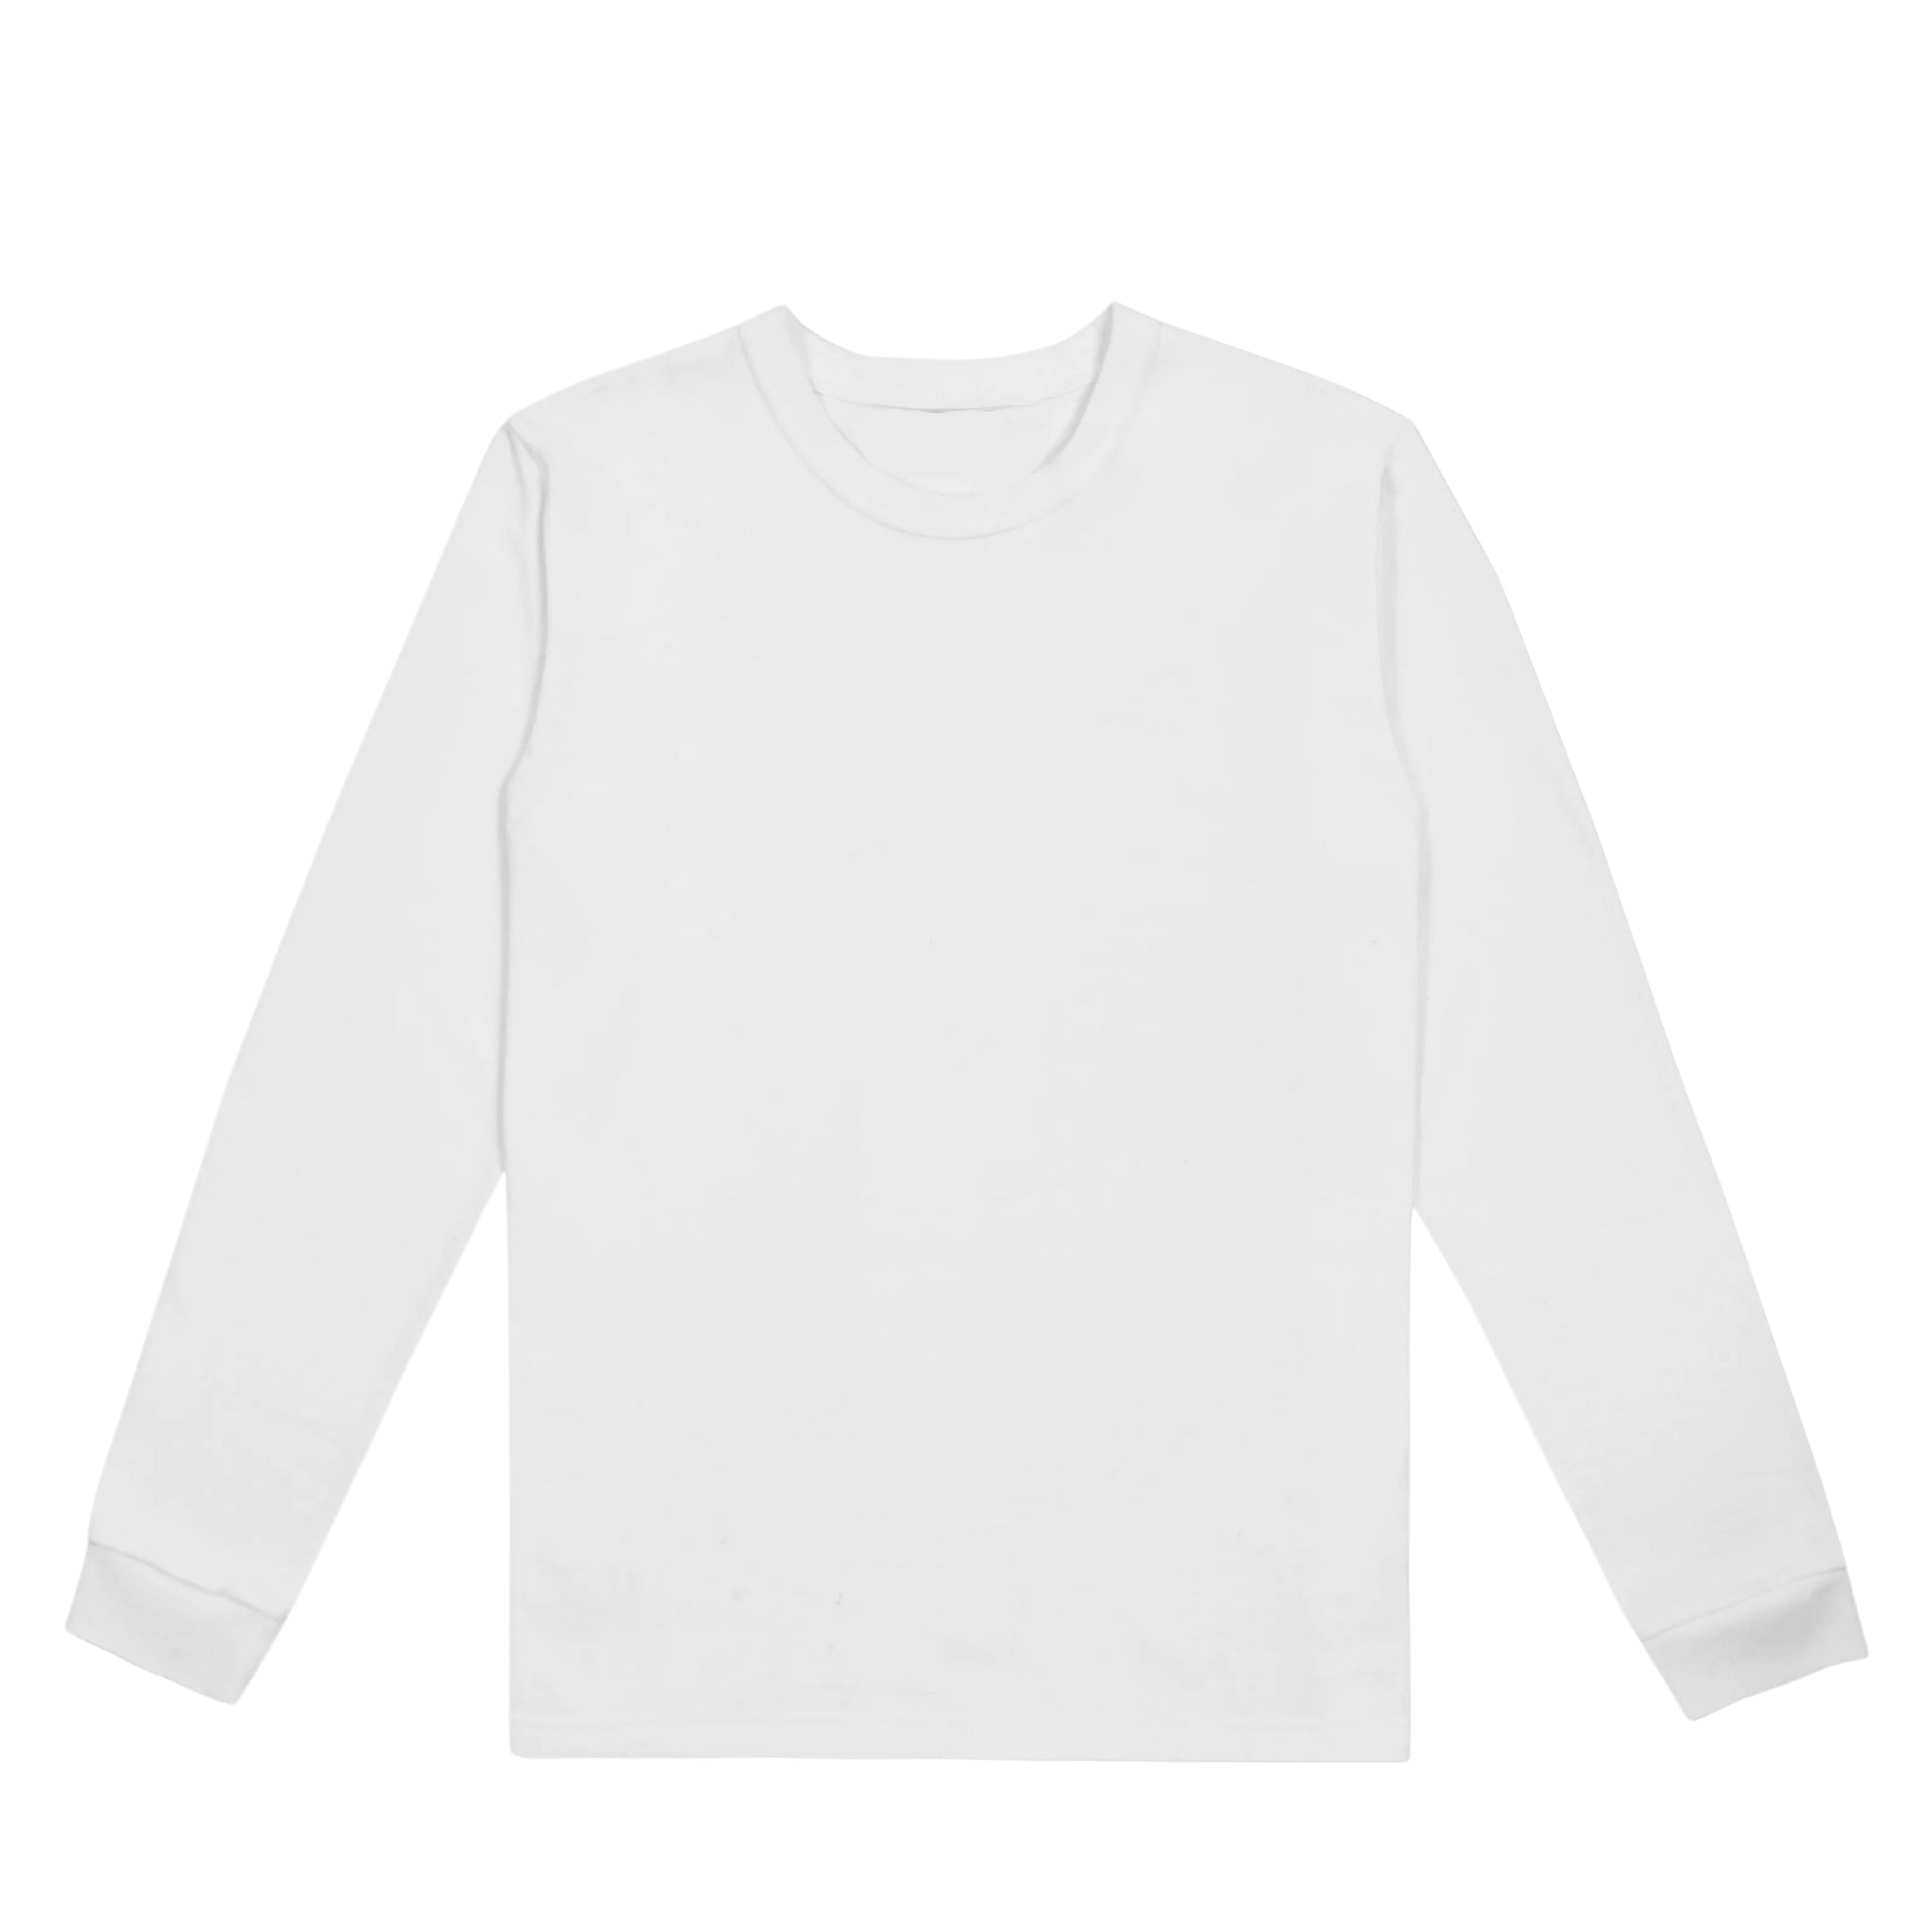 front view of white long sleeve tee, front center on a white background.